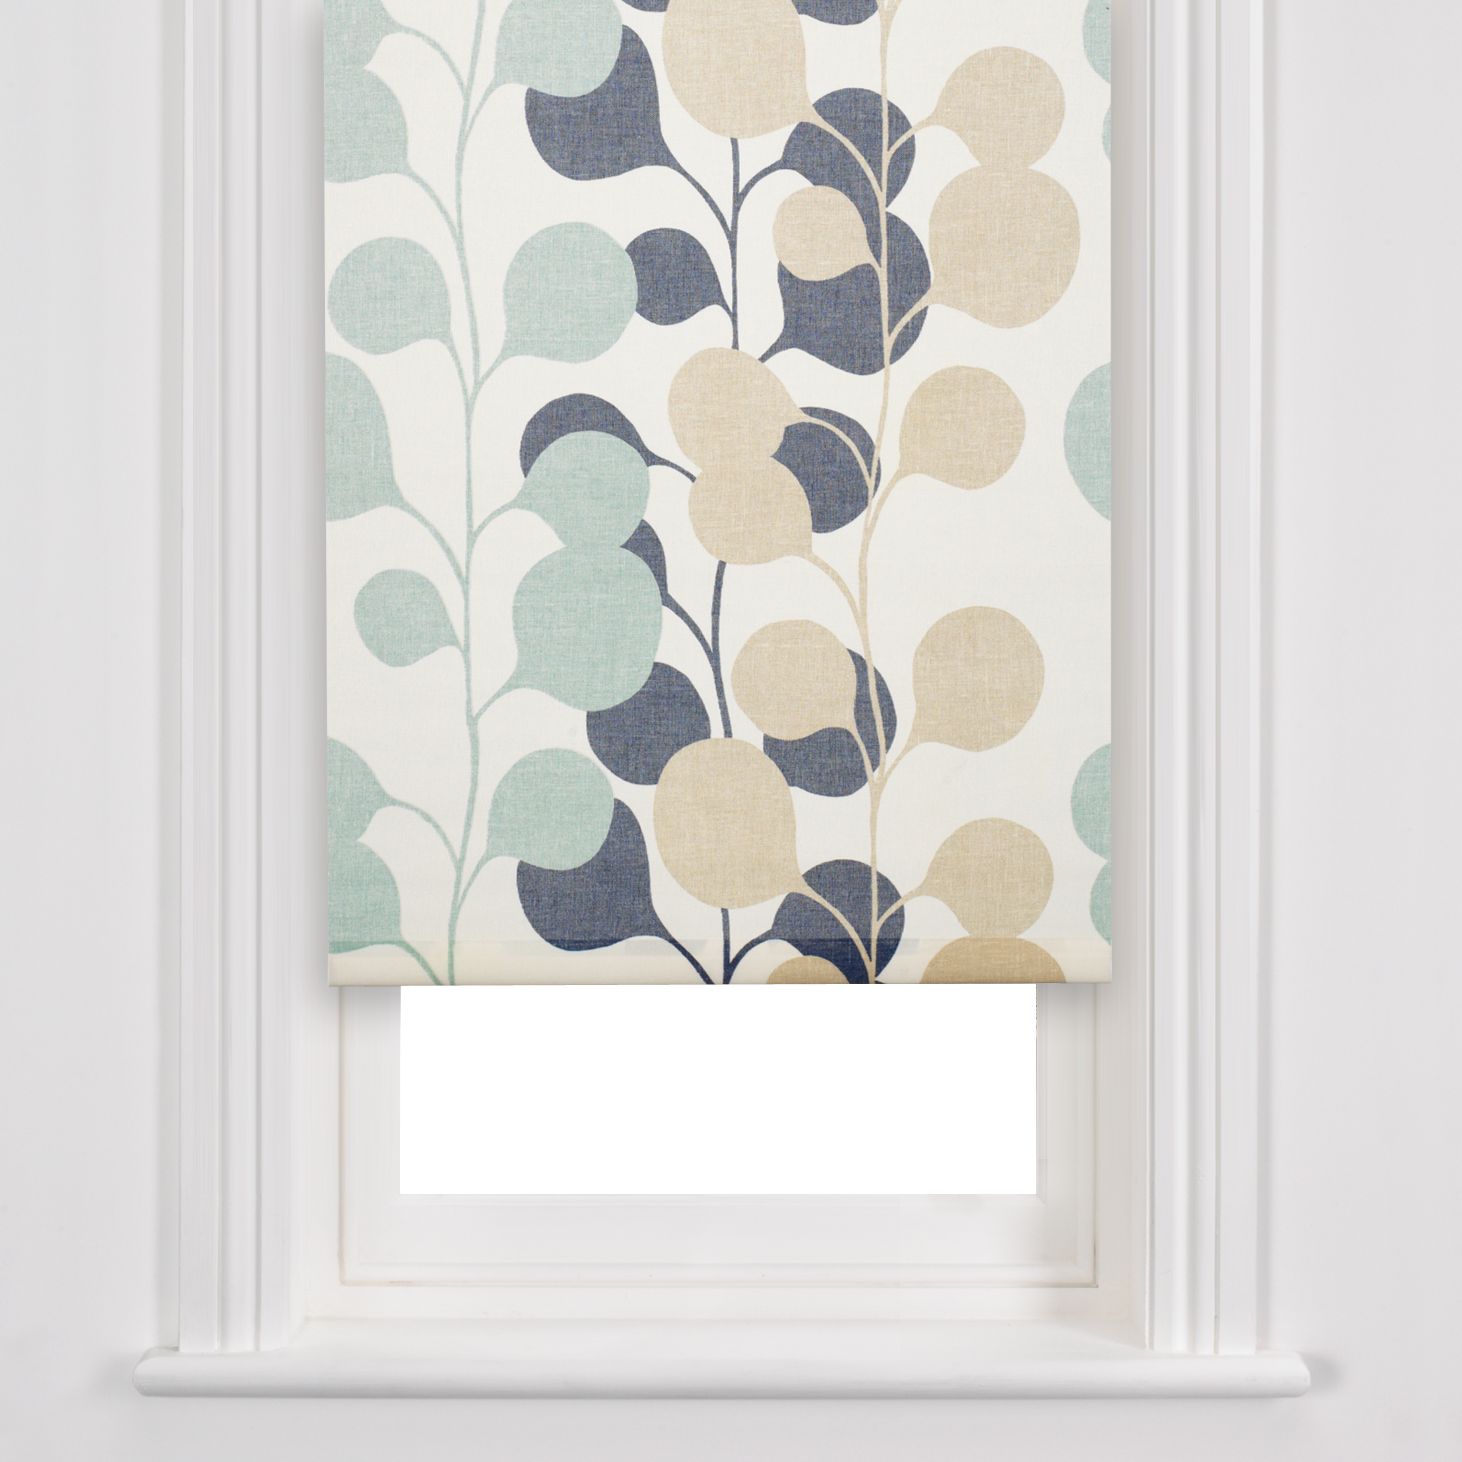 SHADE MAGIC - ROLLER BLINDS WITH EYE-CATCHING DESIGNS | SUNSET